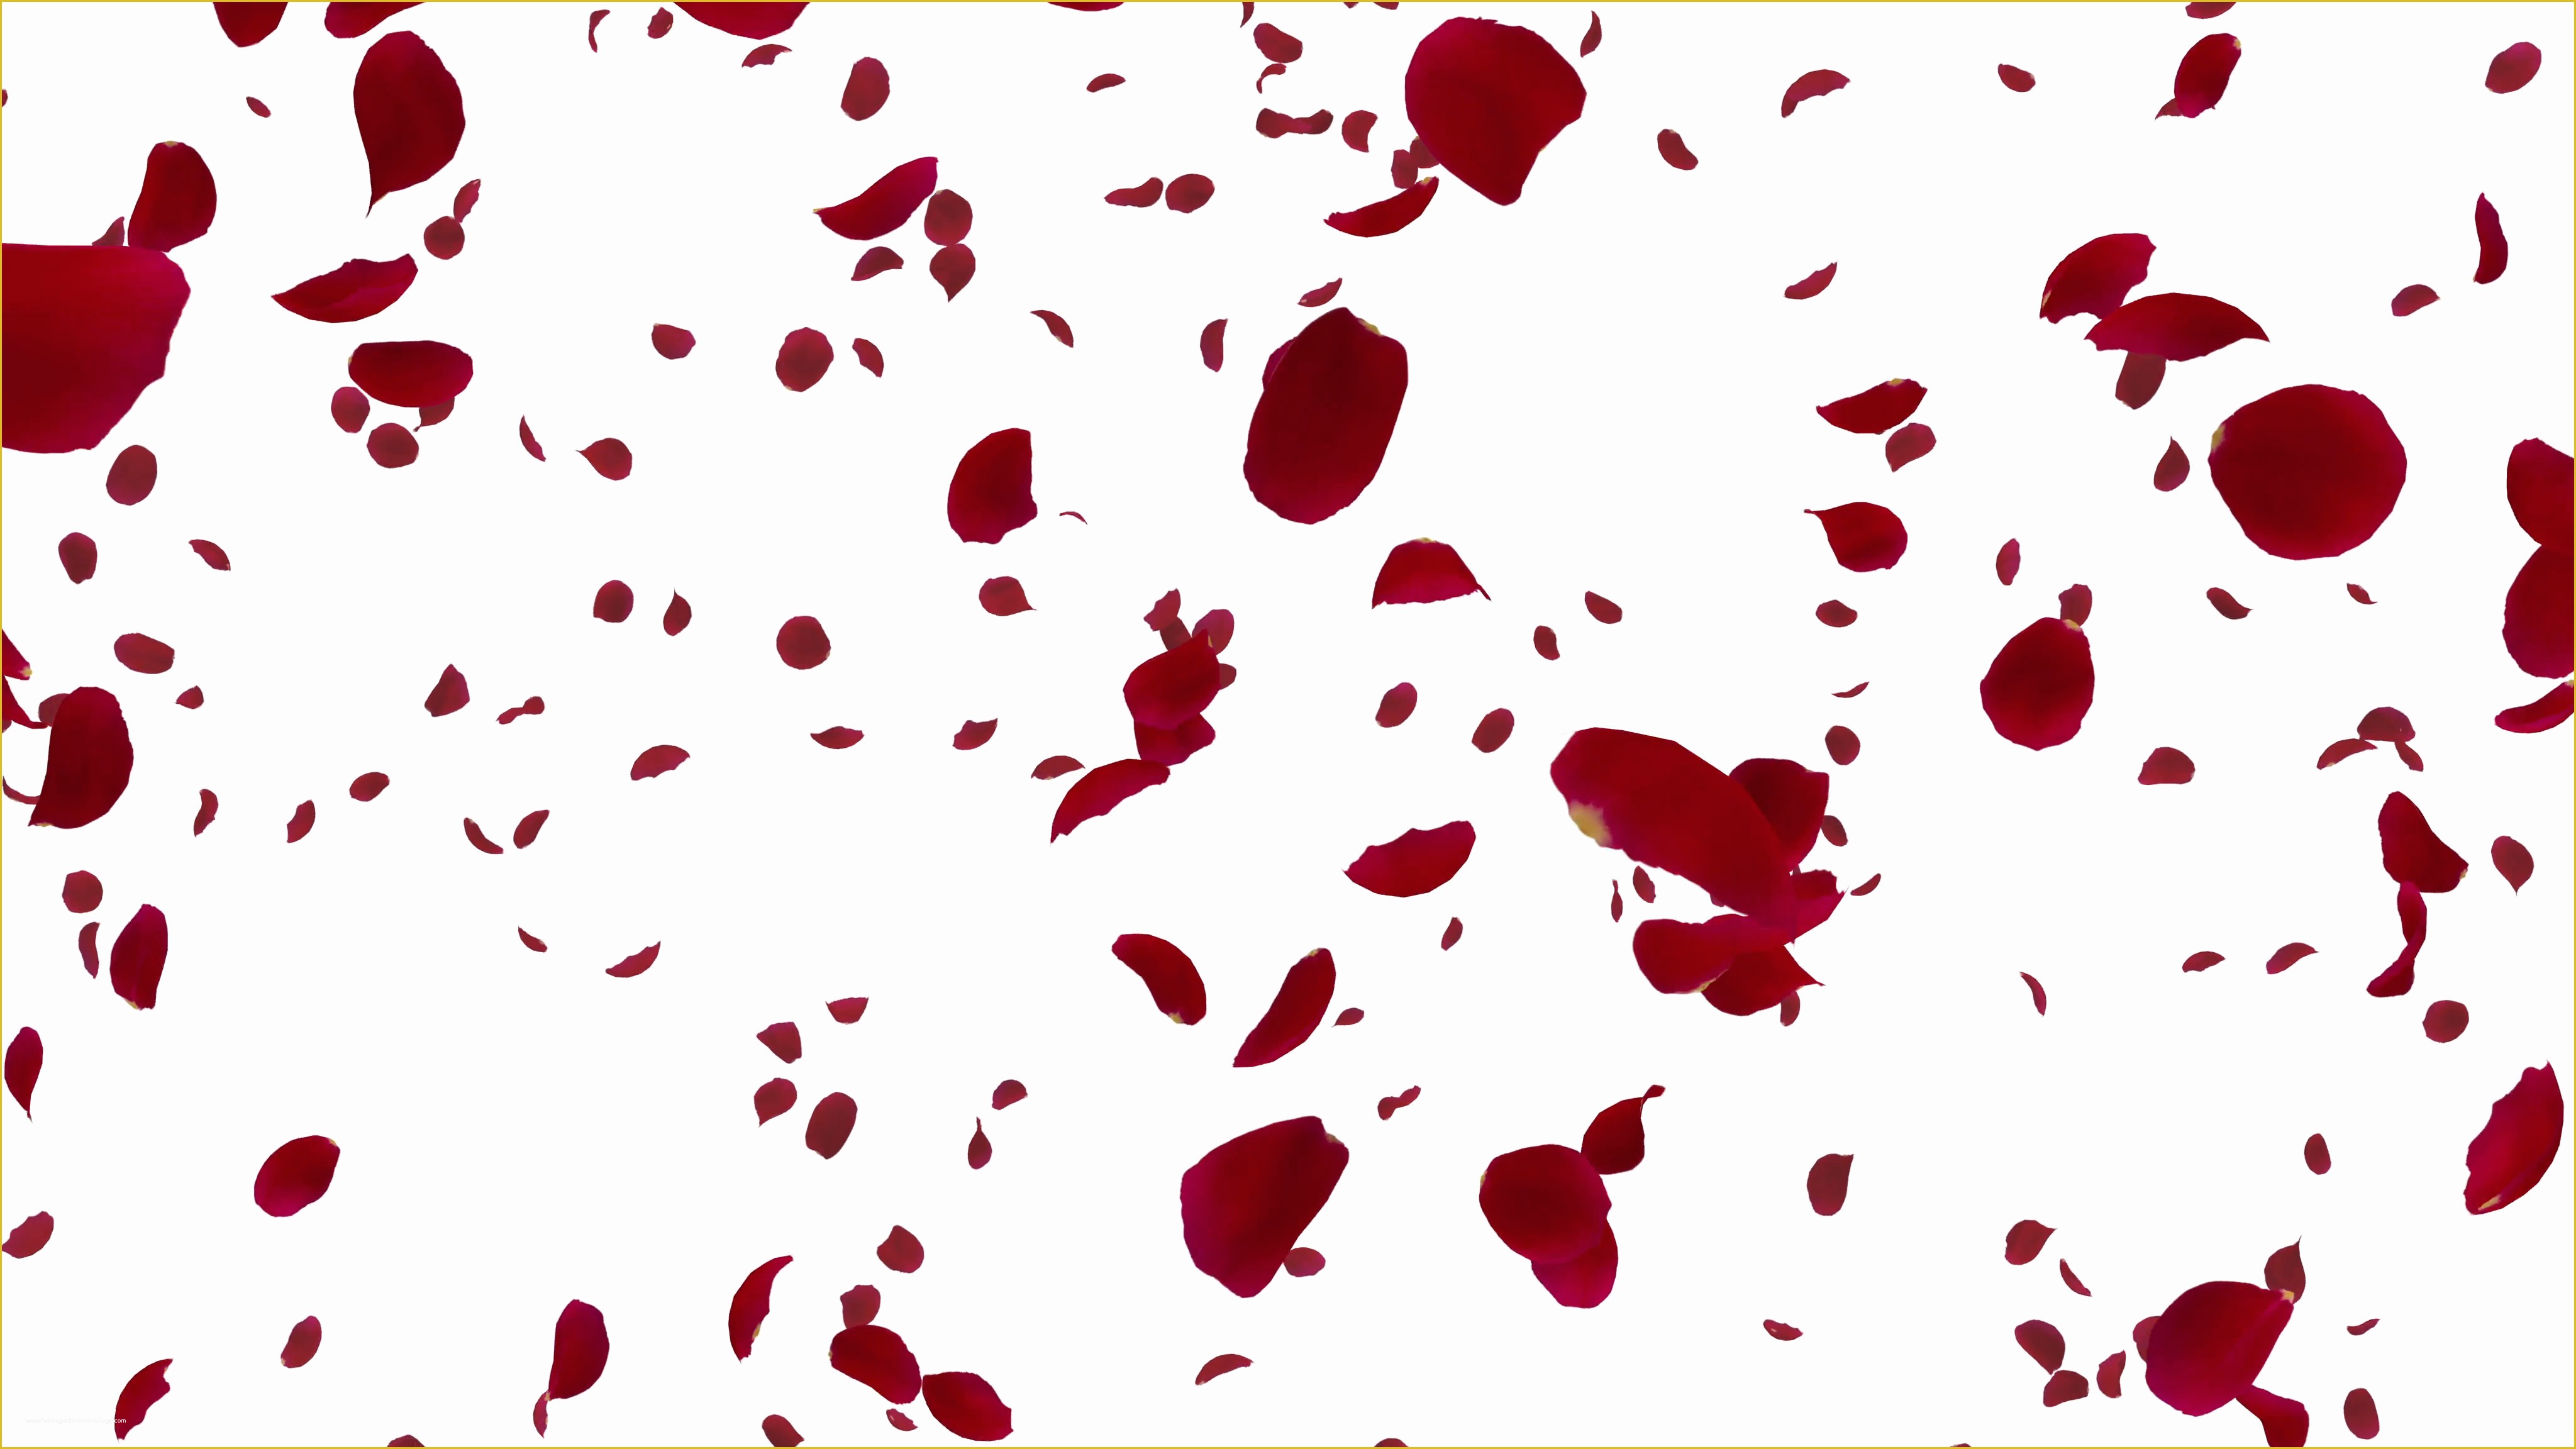 Falling Flower Petals after Effects Template Free Of Rose Petals Red tornado Cw 4k Motion Background